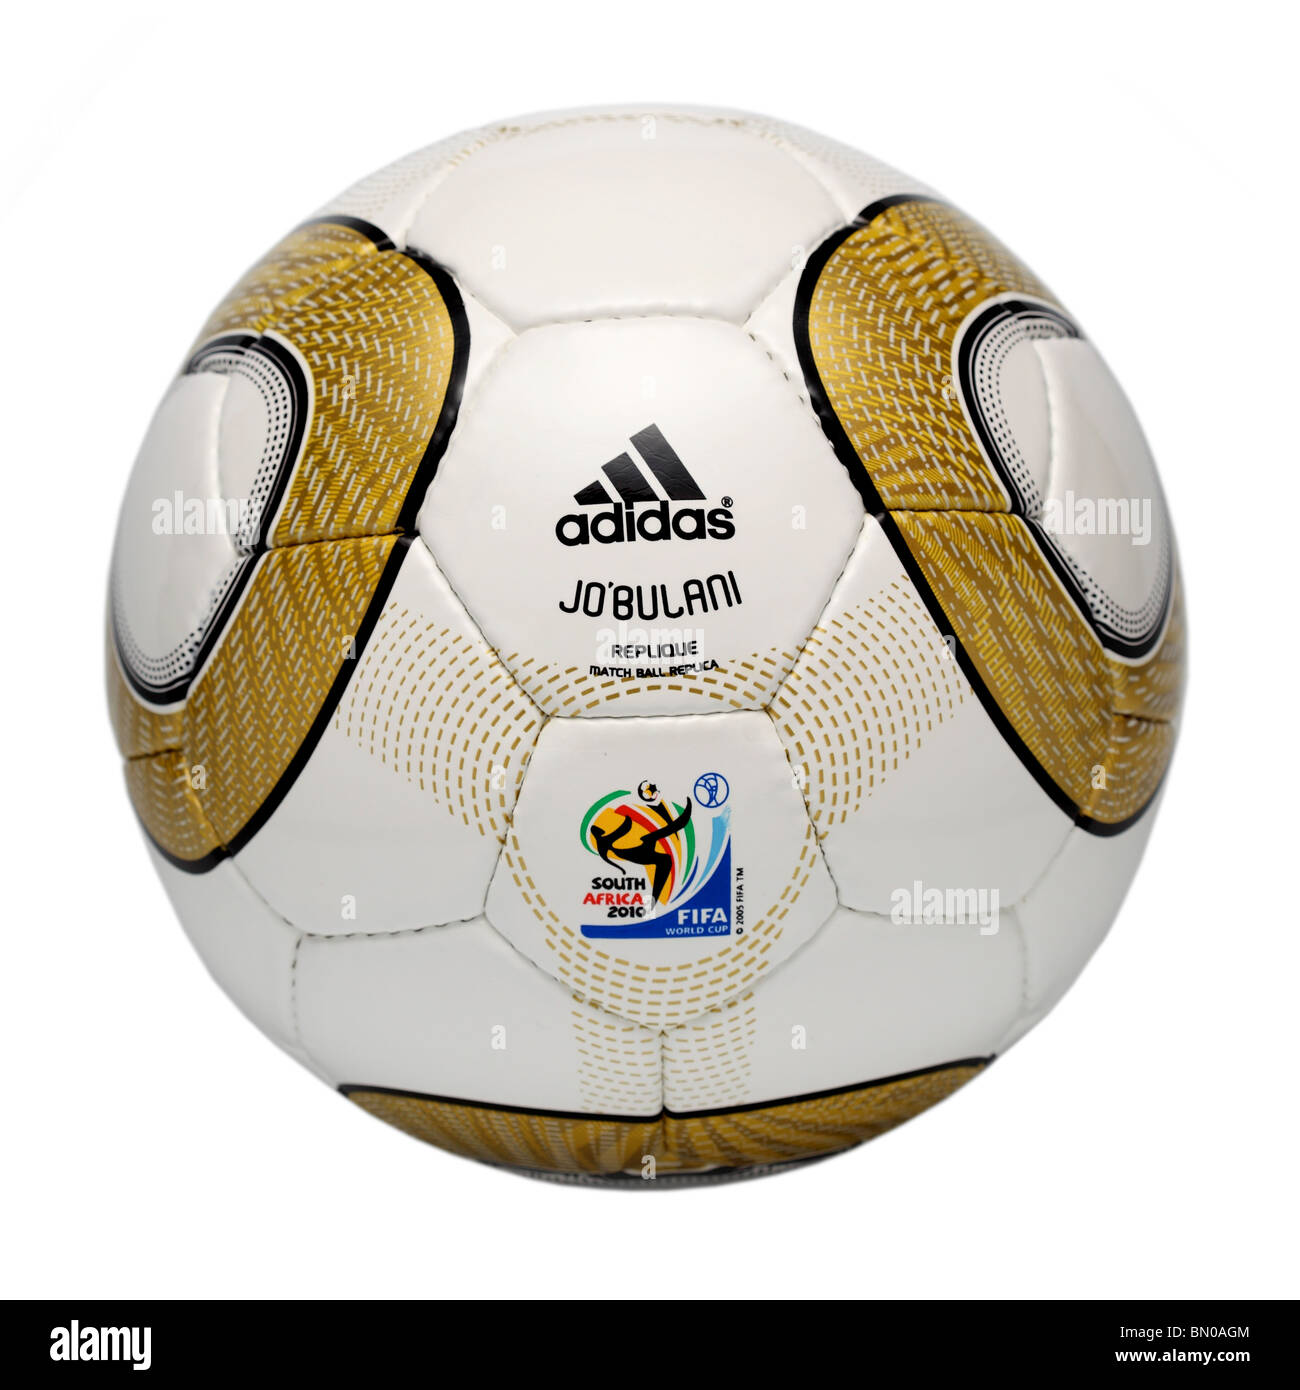 Adidas World Cup Ball High Resolution Stock Photography and Images - Alamy